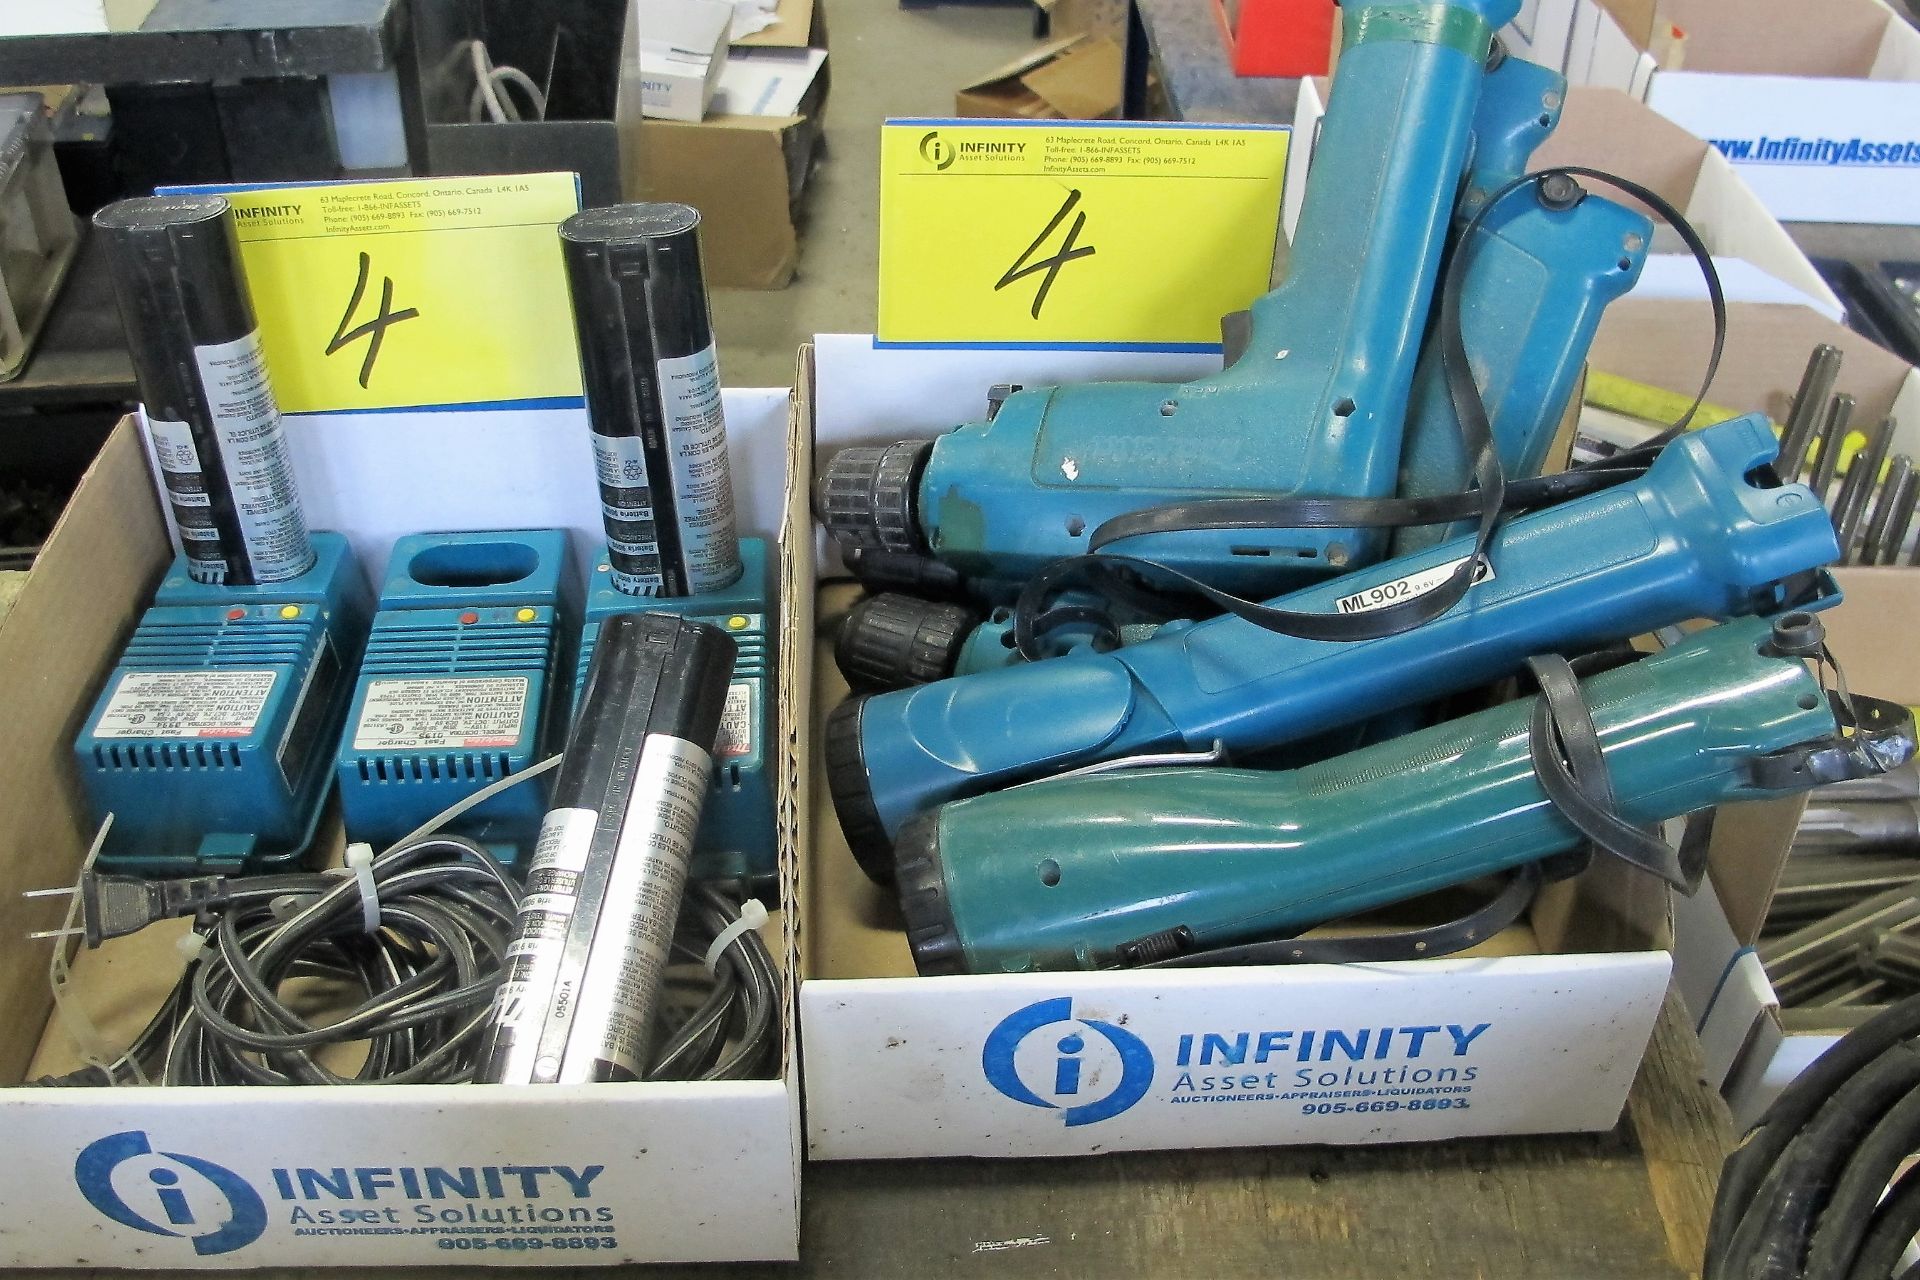 LOT (2) BOXES OF MAKITA CORDLESS DRILLS, FLASHLIGHTS, BATTERIES, CHARGERS, ETC.